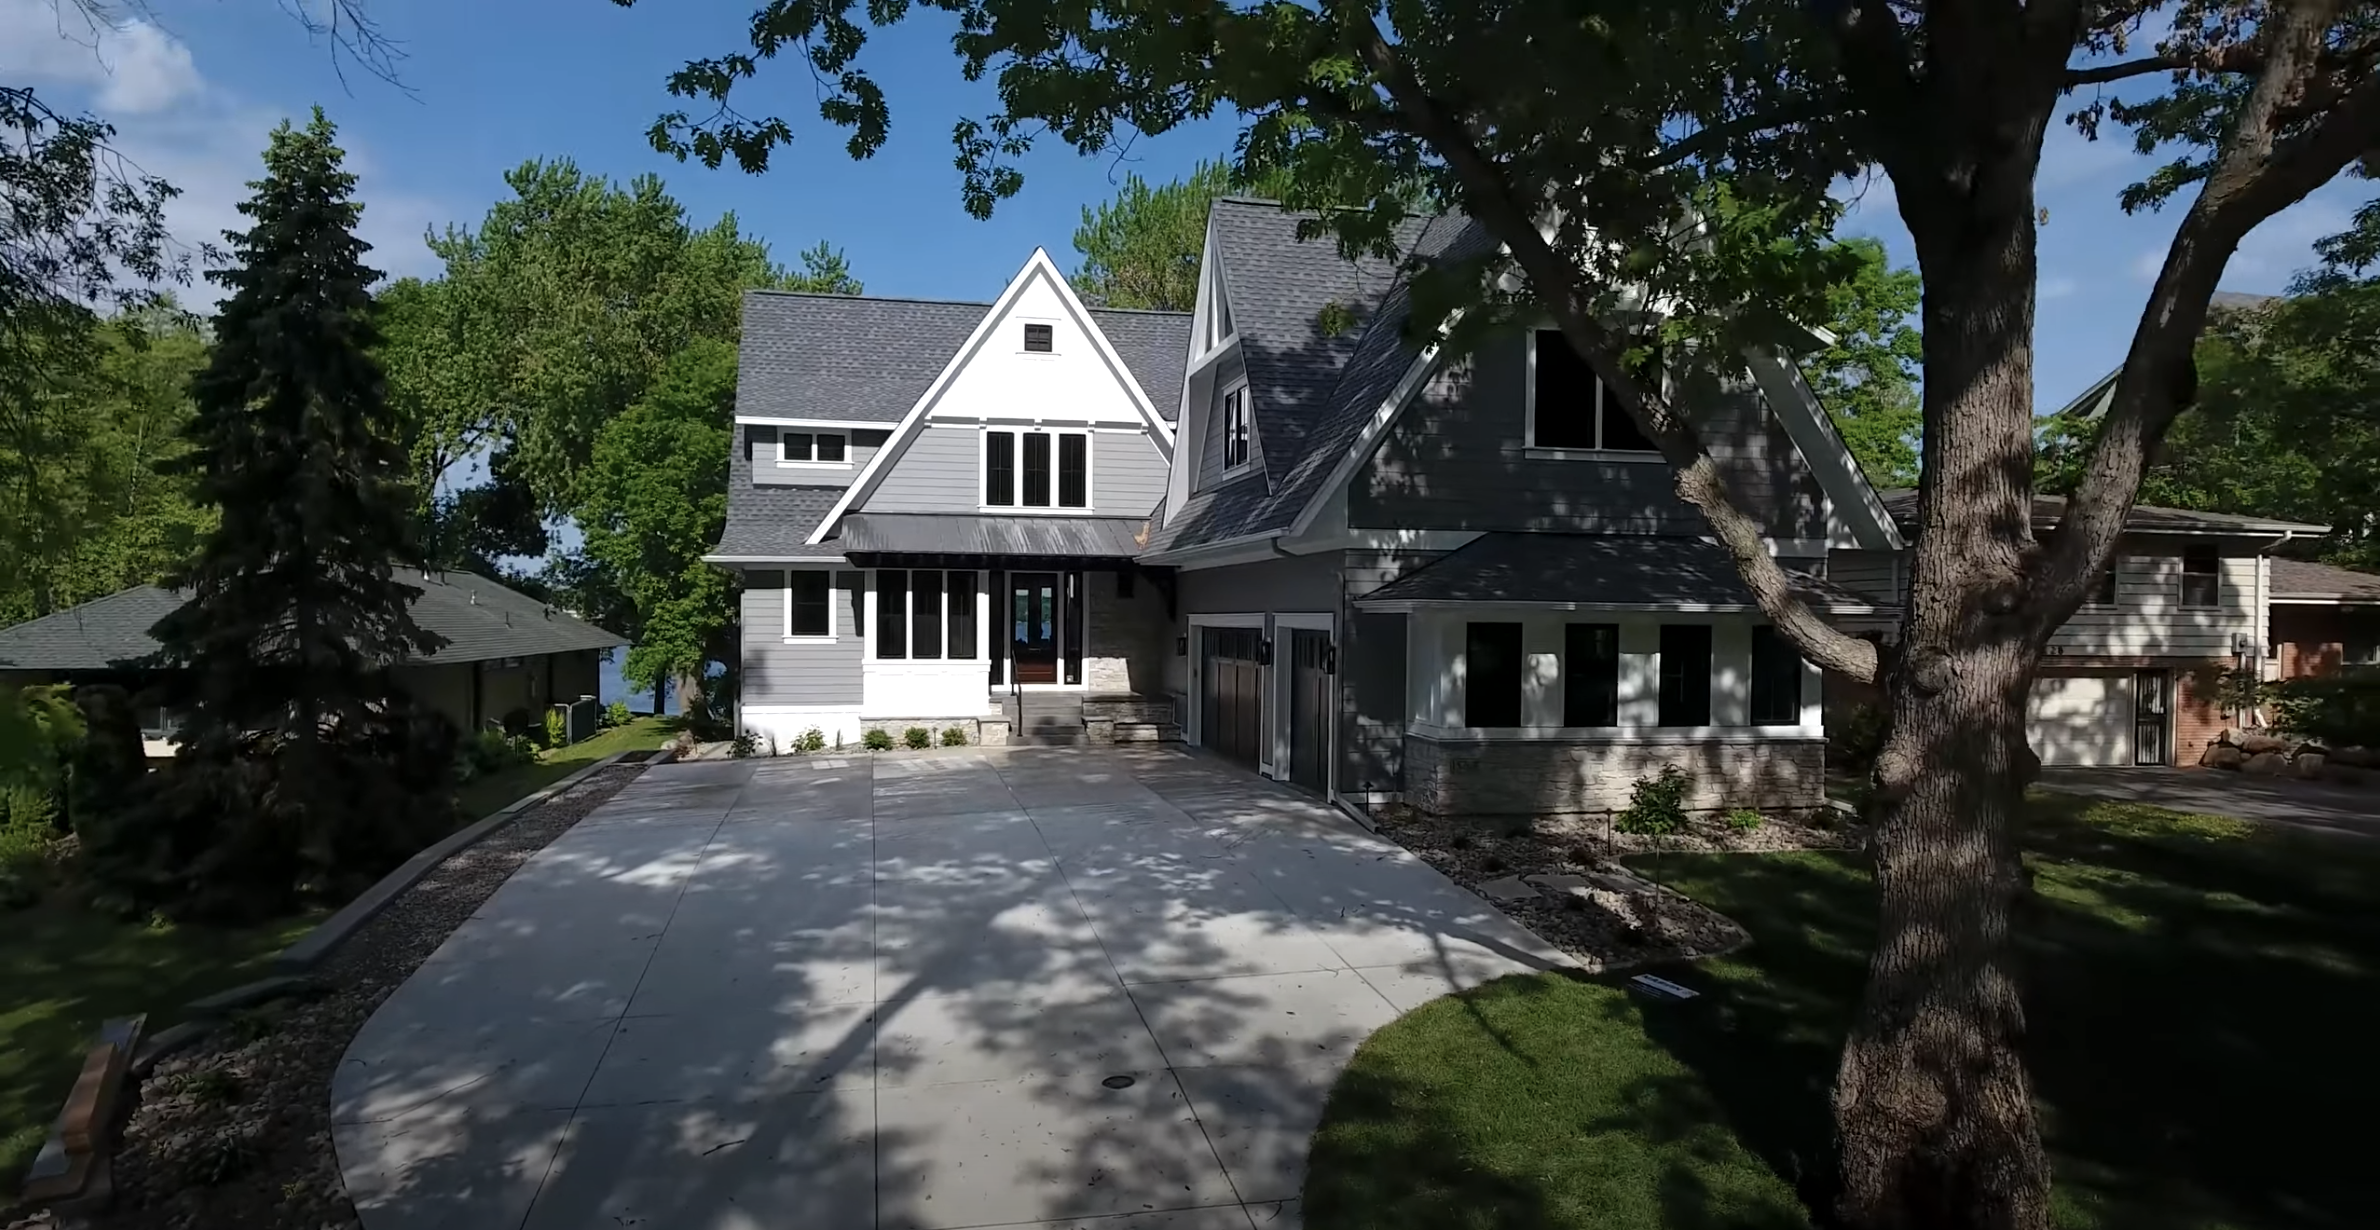 A Custom Home Build Video Series showcasing an aerial view of a home with a driveway and trees.